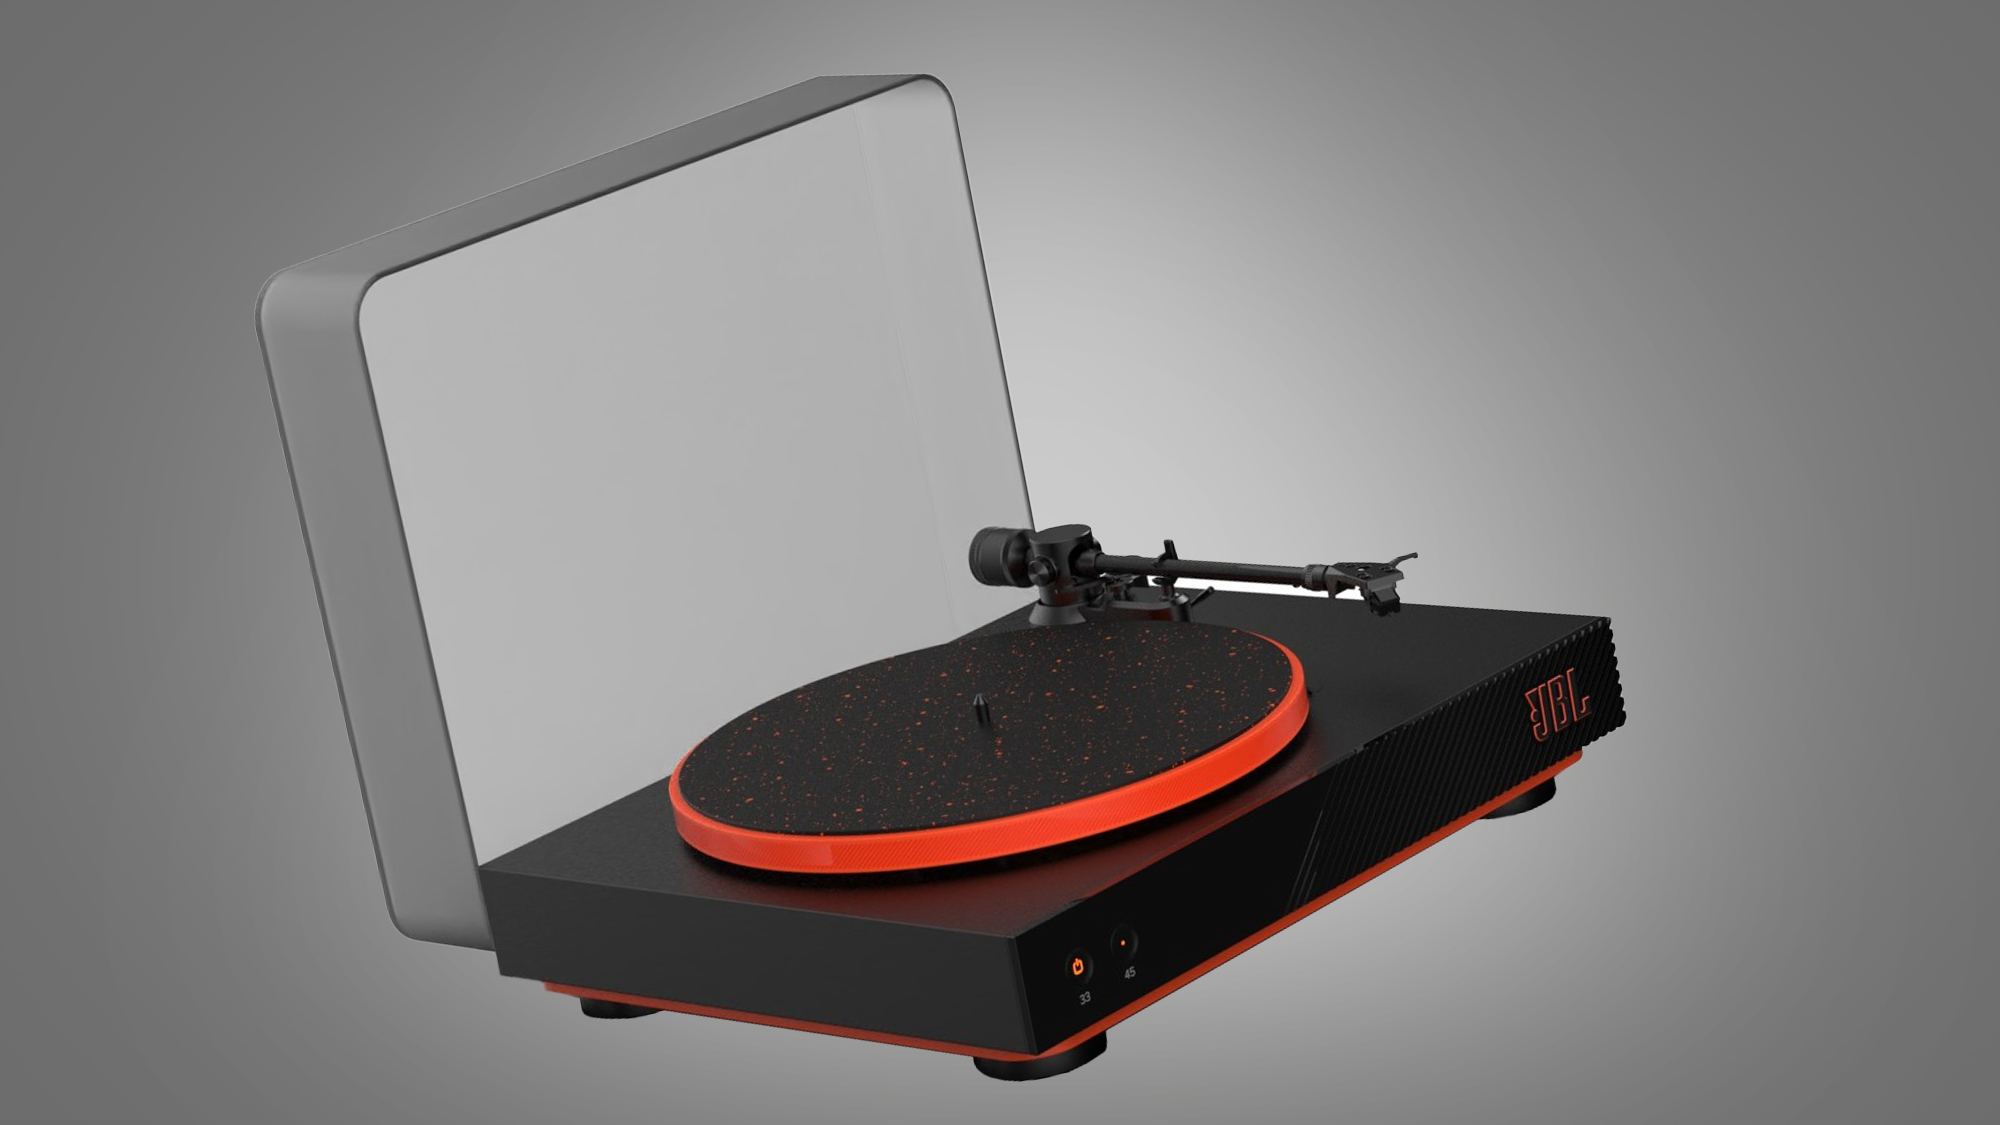 The JBL Spinner BT turntable on a grey background